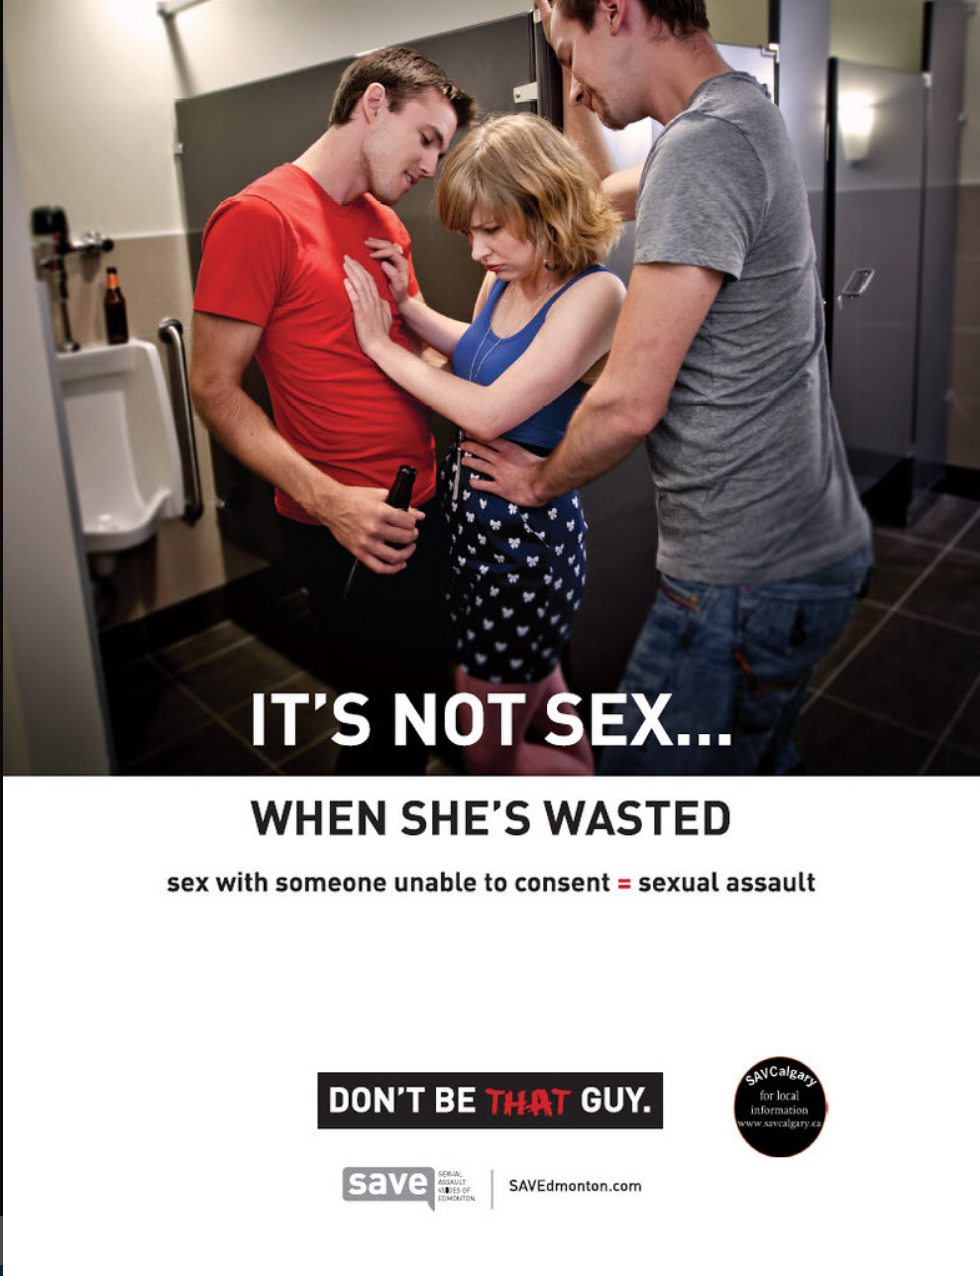 It's not sex - when she's wasted